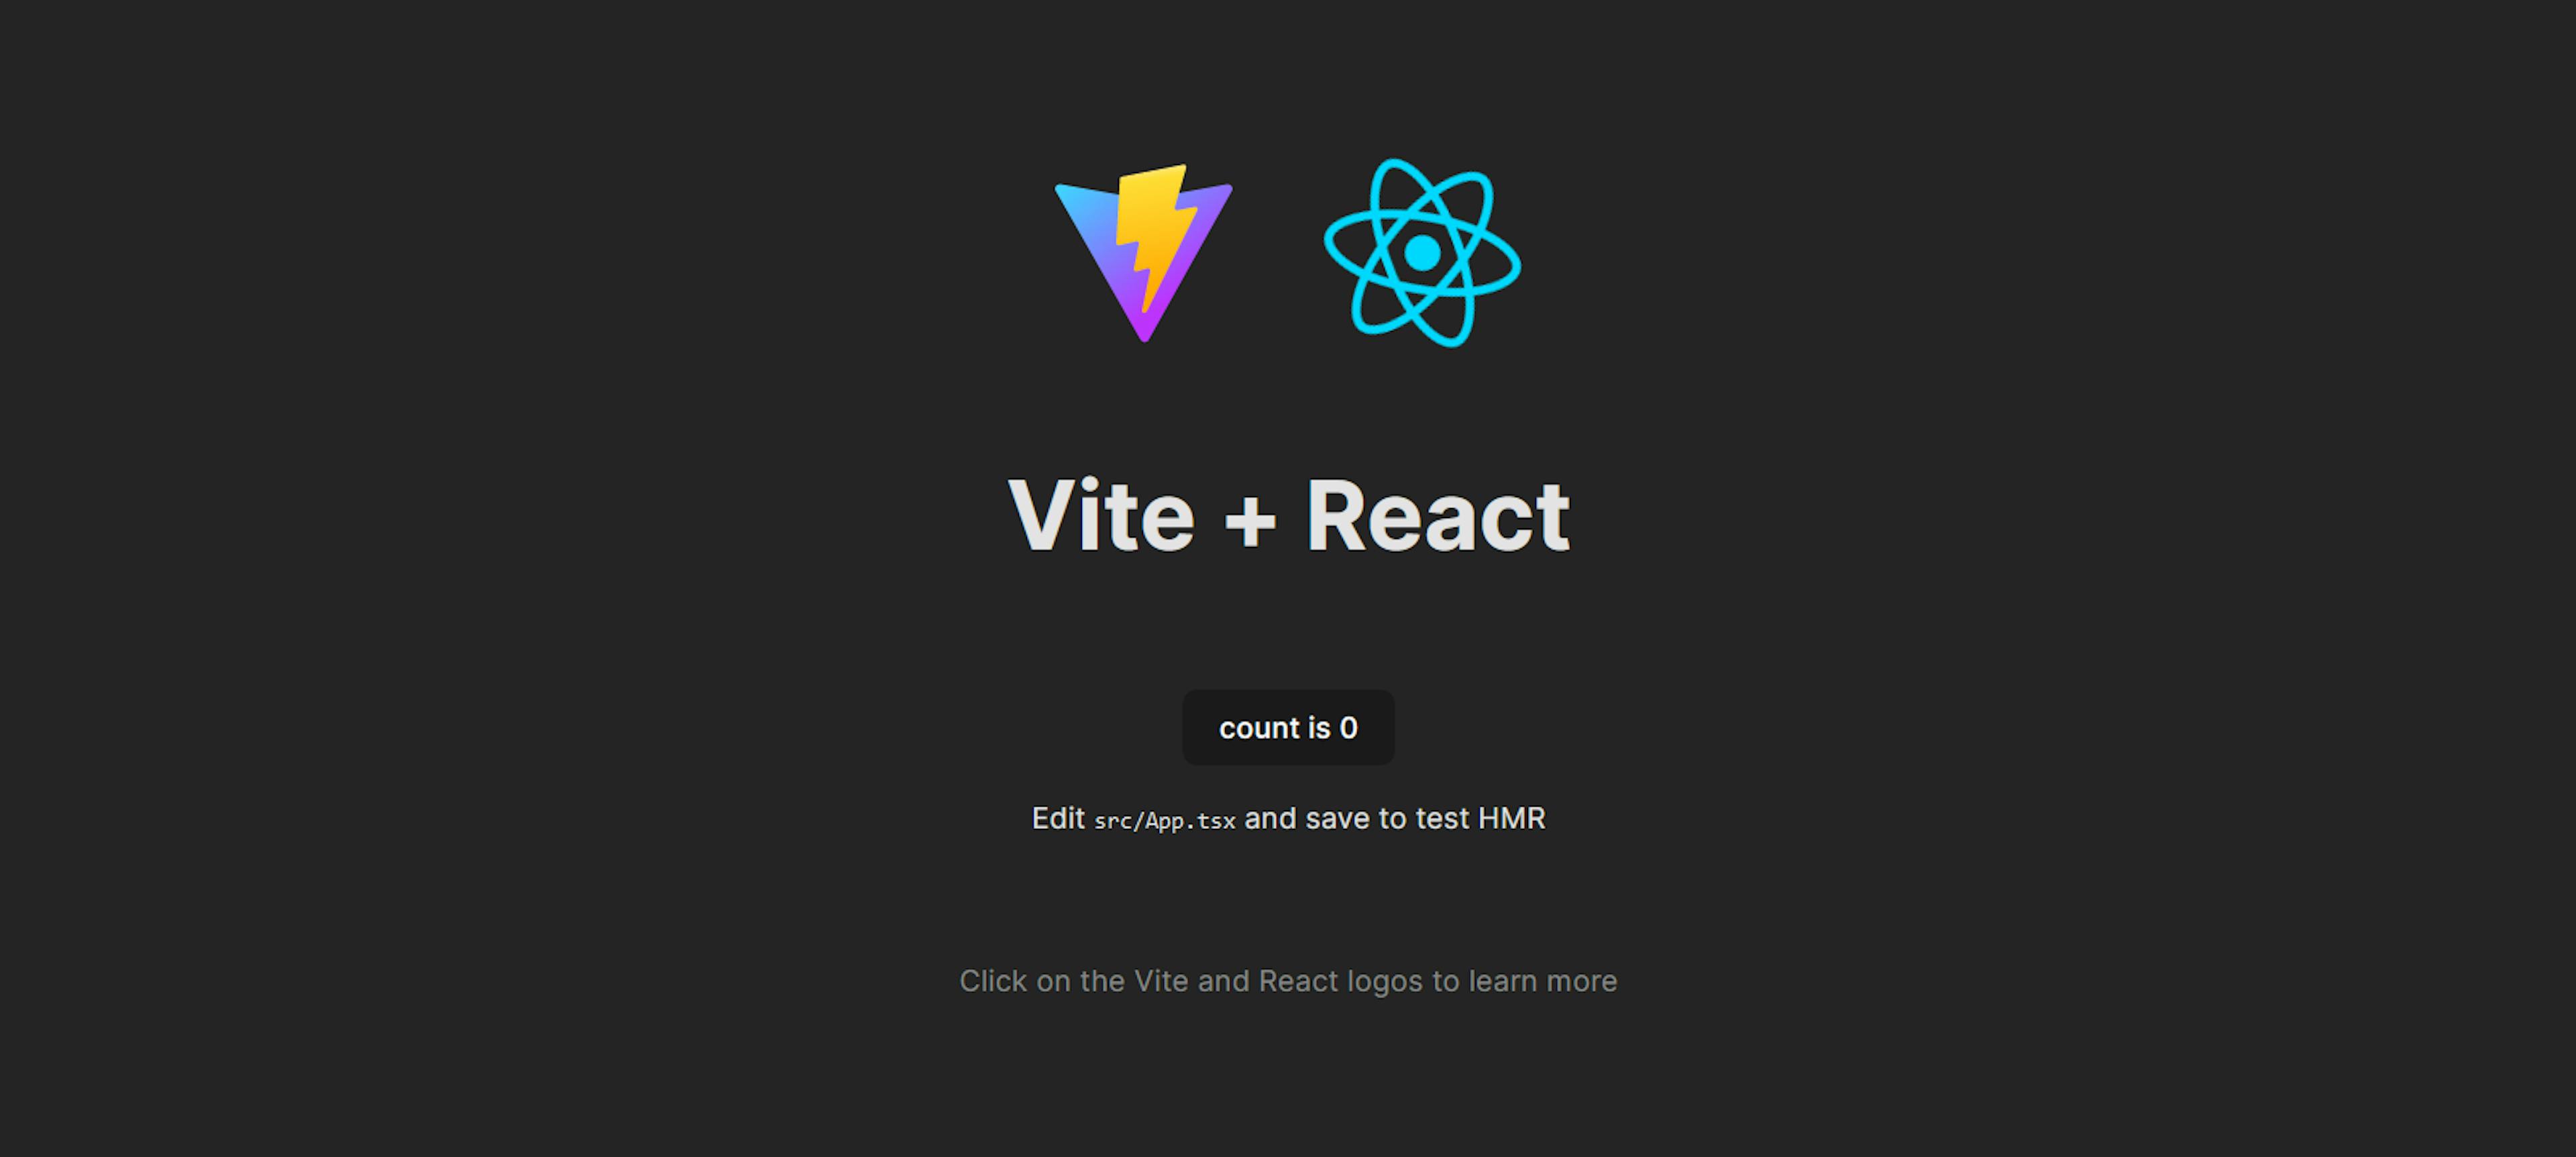 An image of Vite and React project.